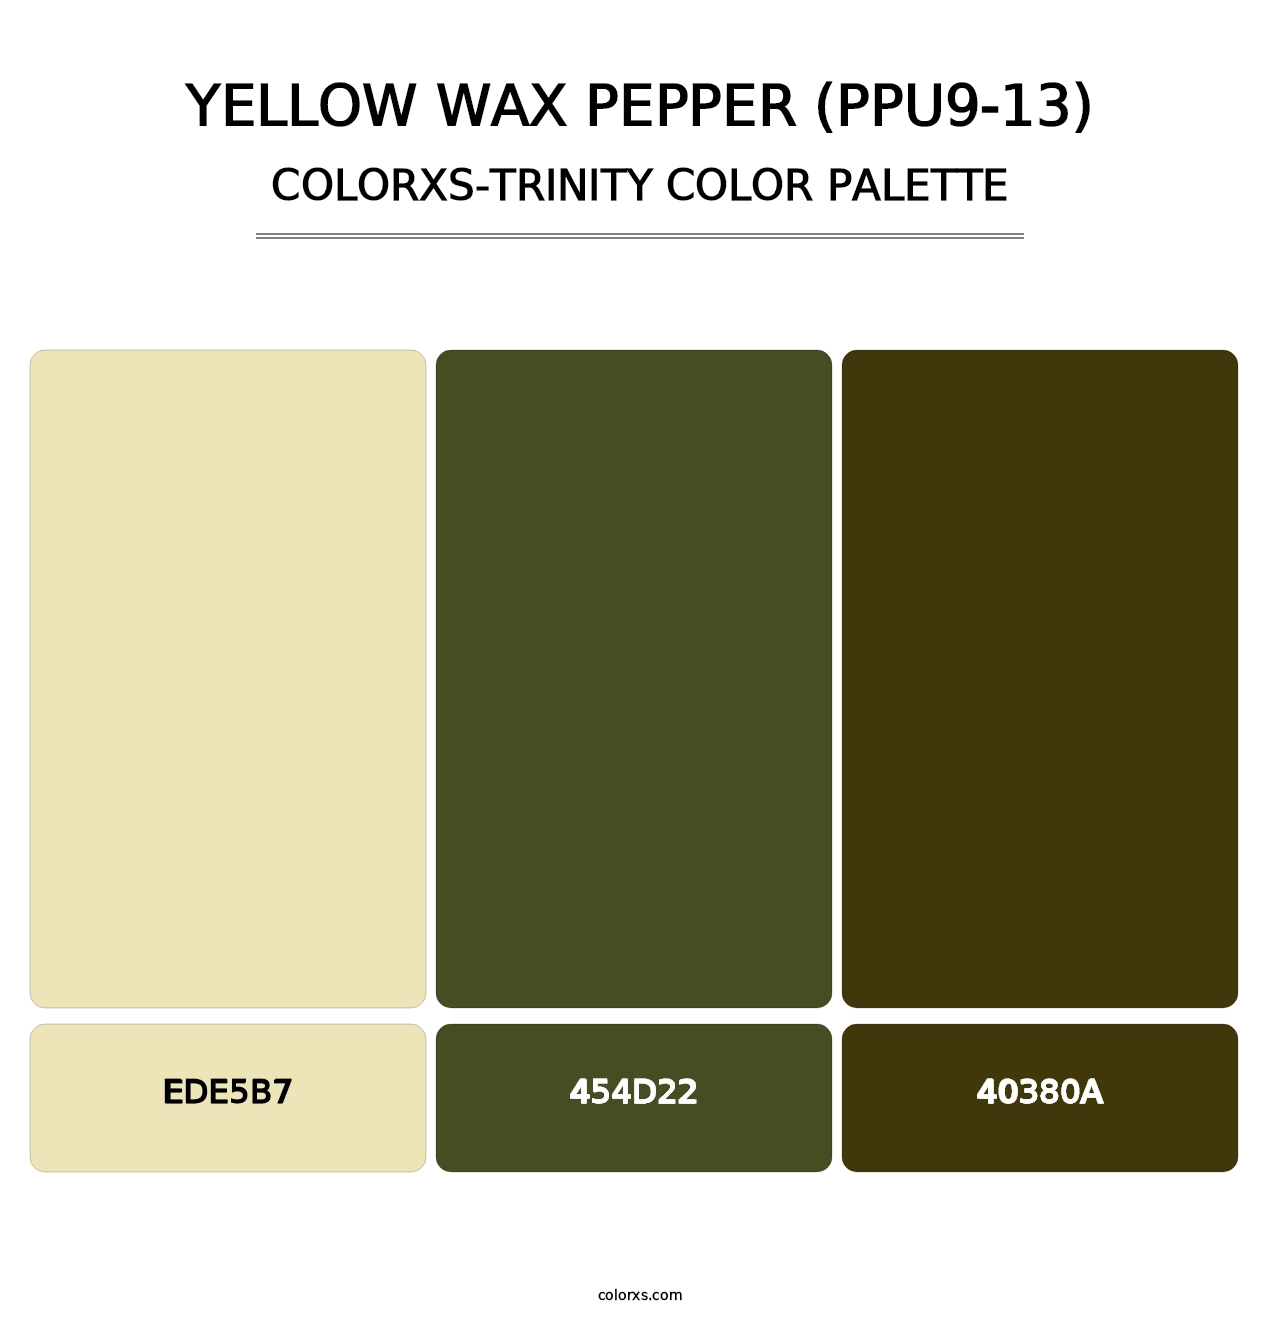 Yellow Wax Pepper (PPU9-13) - Colorxs Trinity Palette